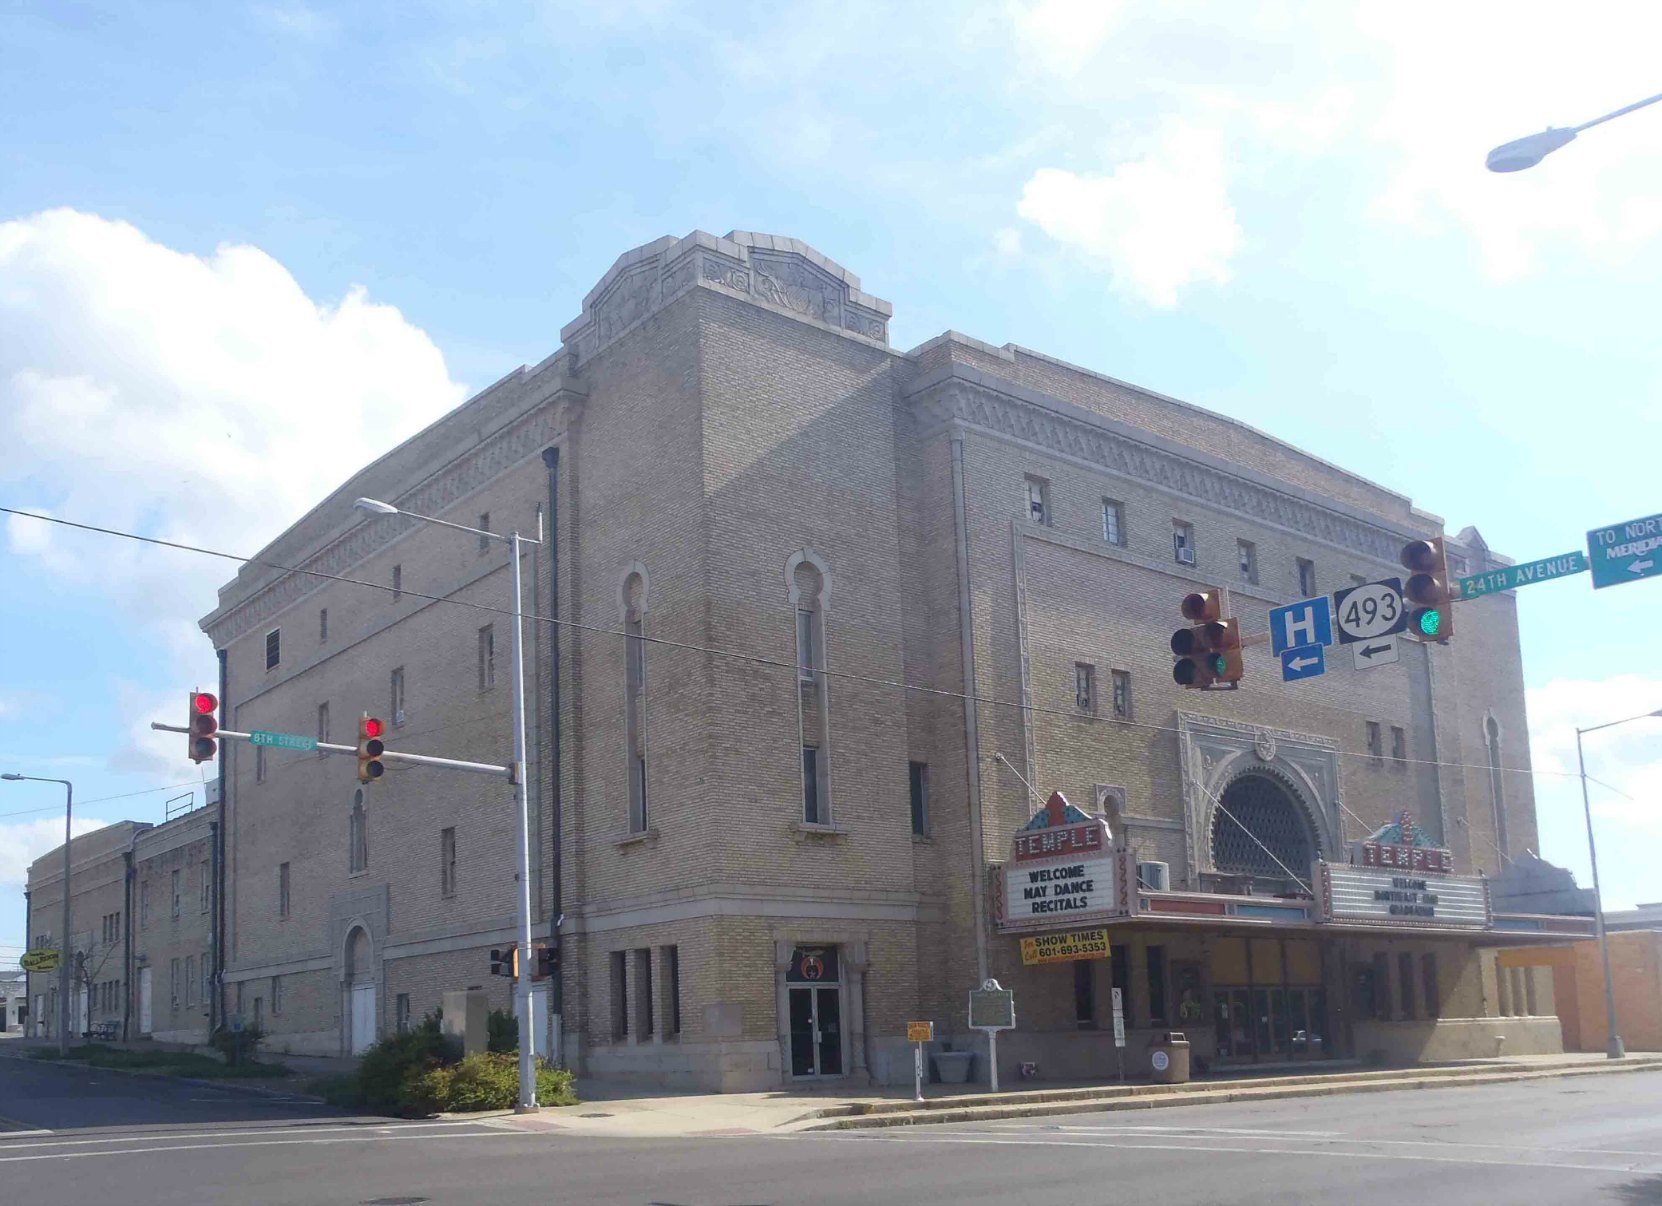 The Temple Theatre, Meridian, Mississippi.